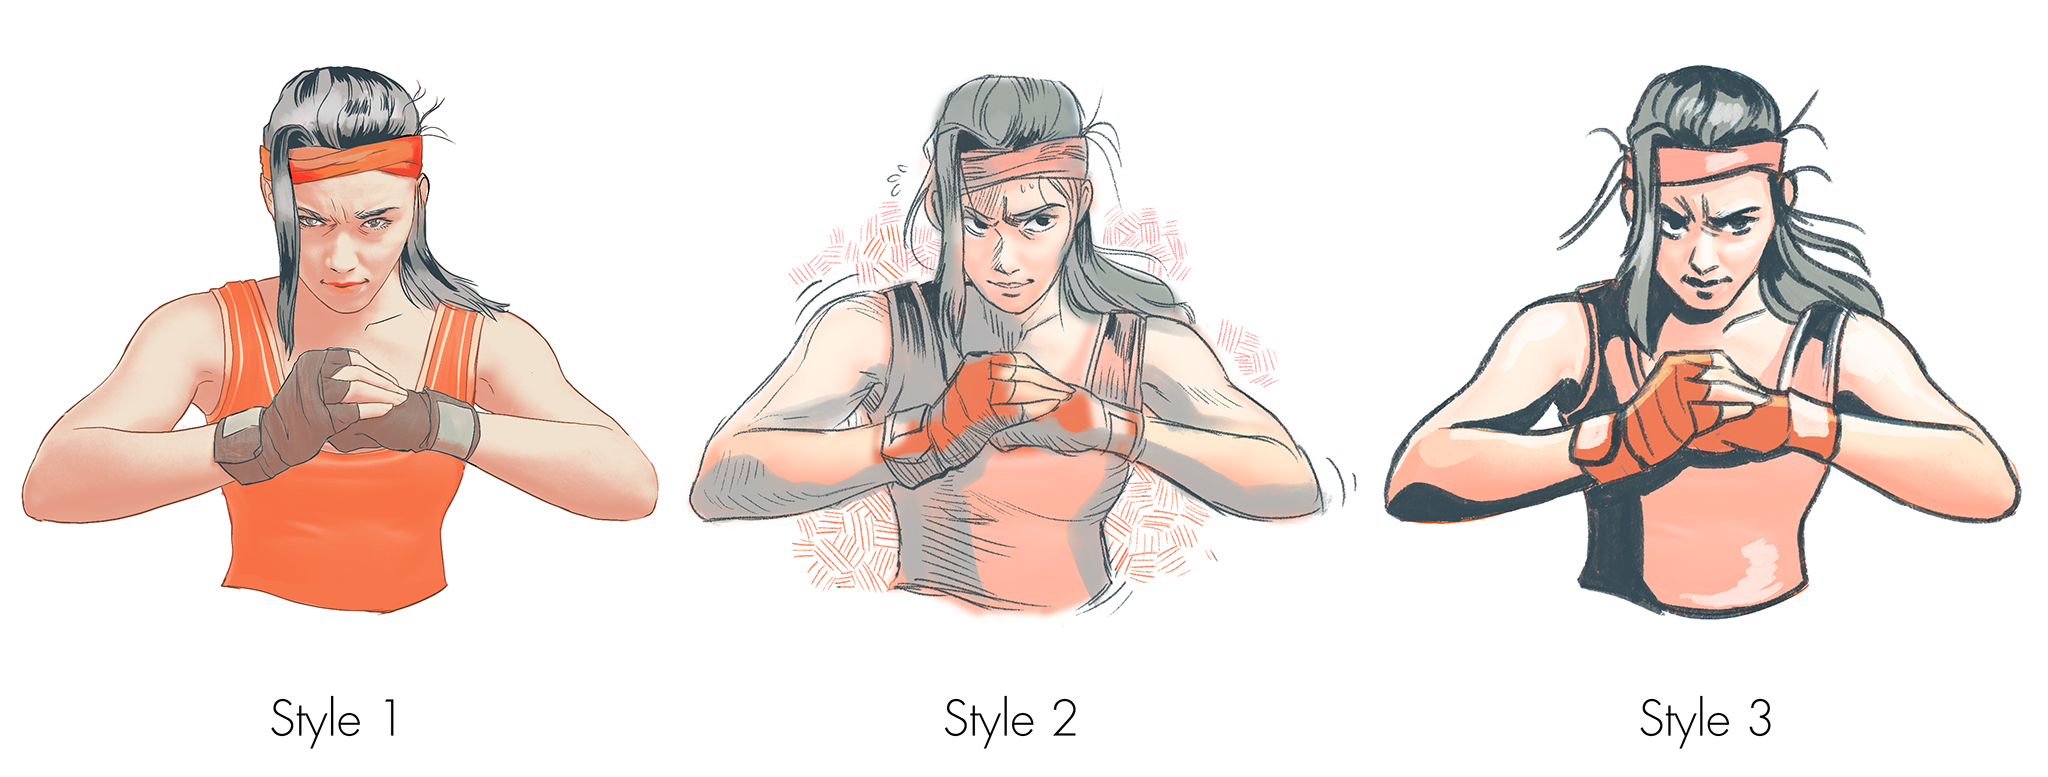 different_styles.png